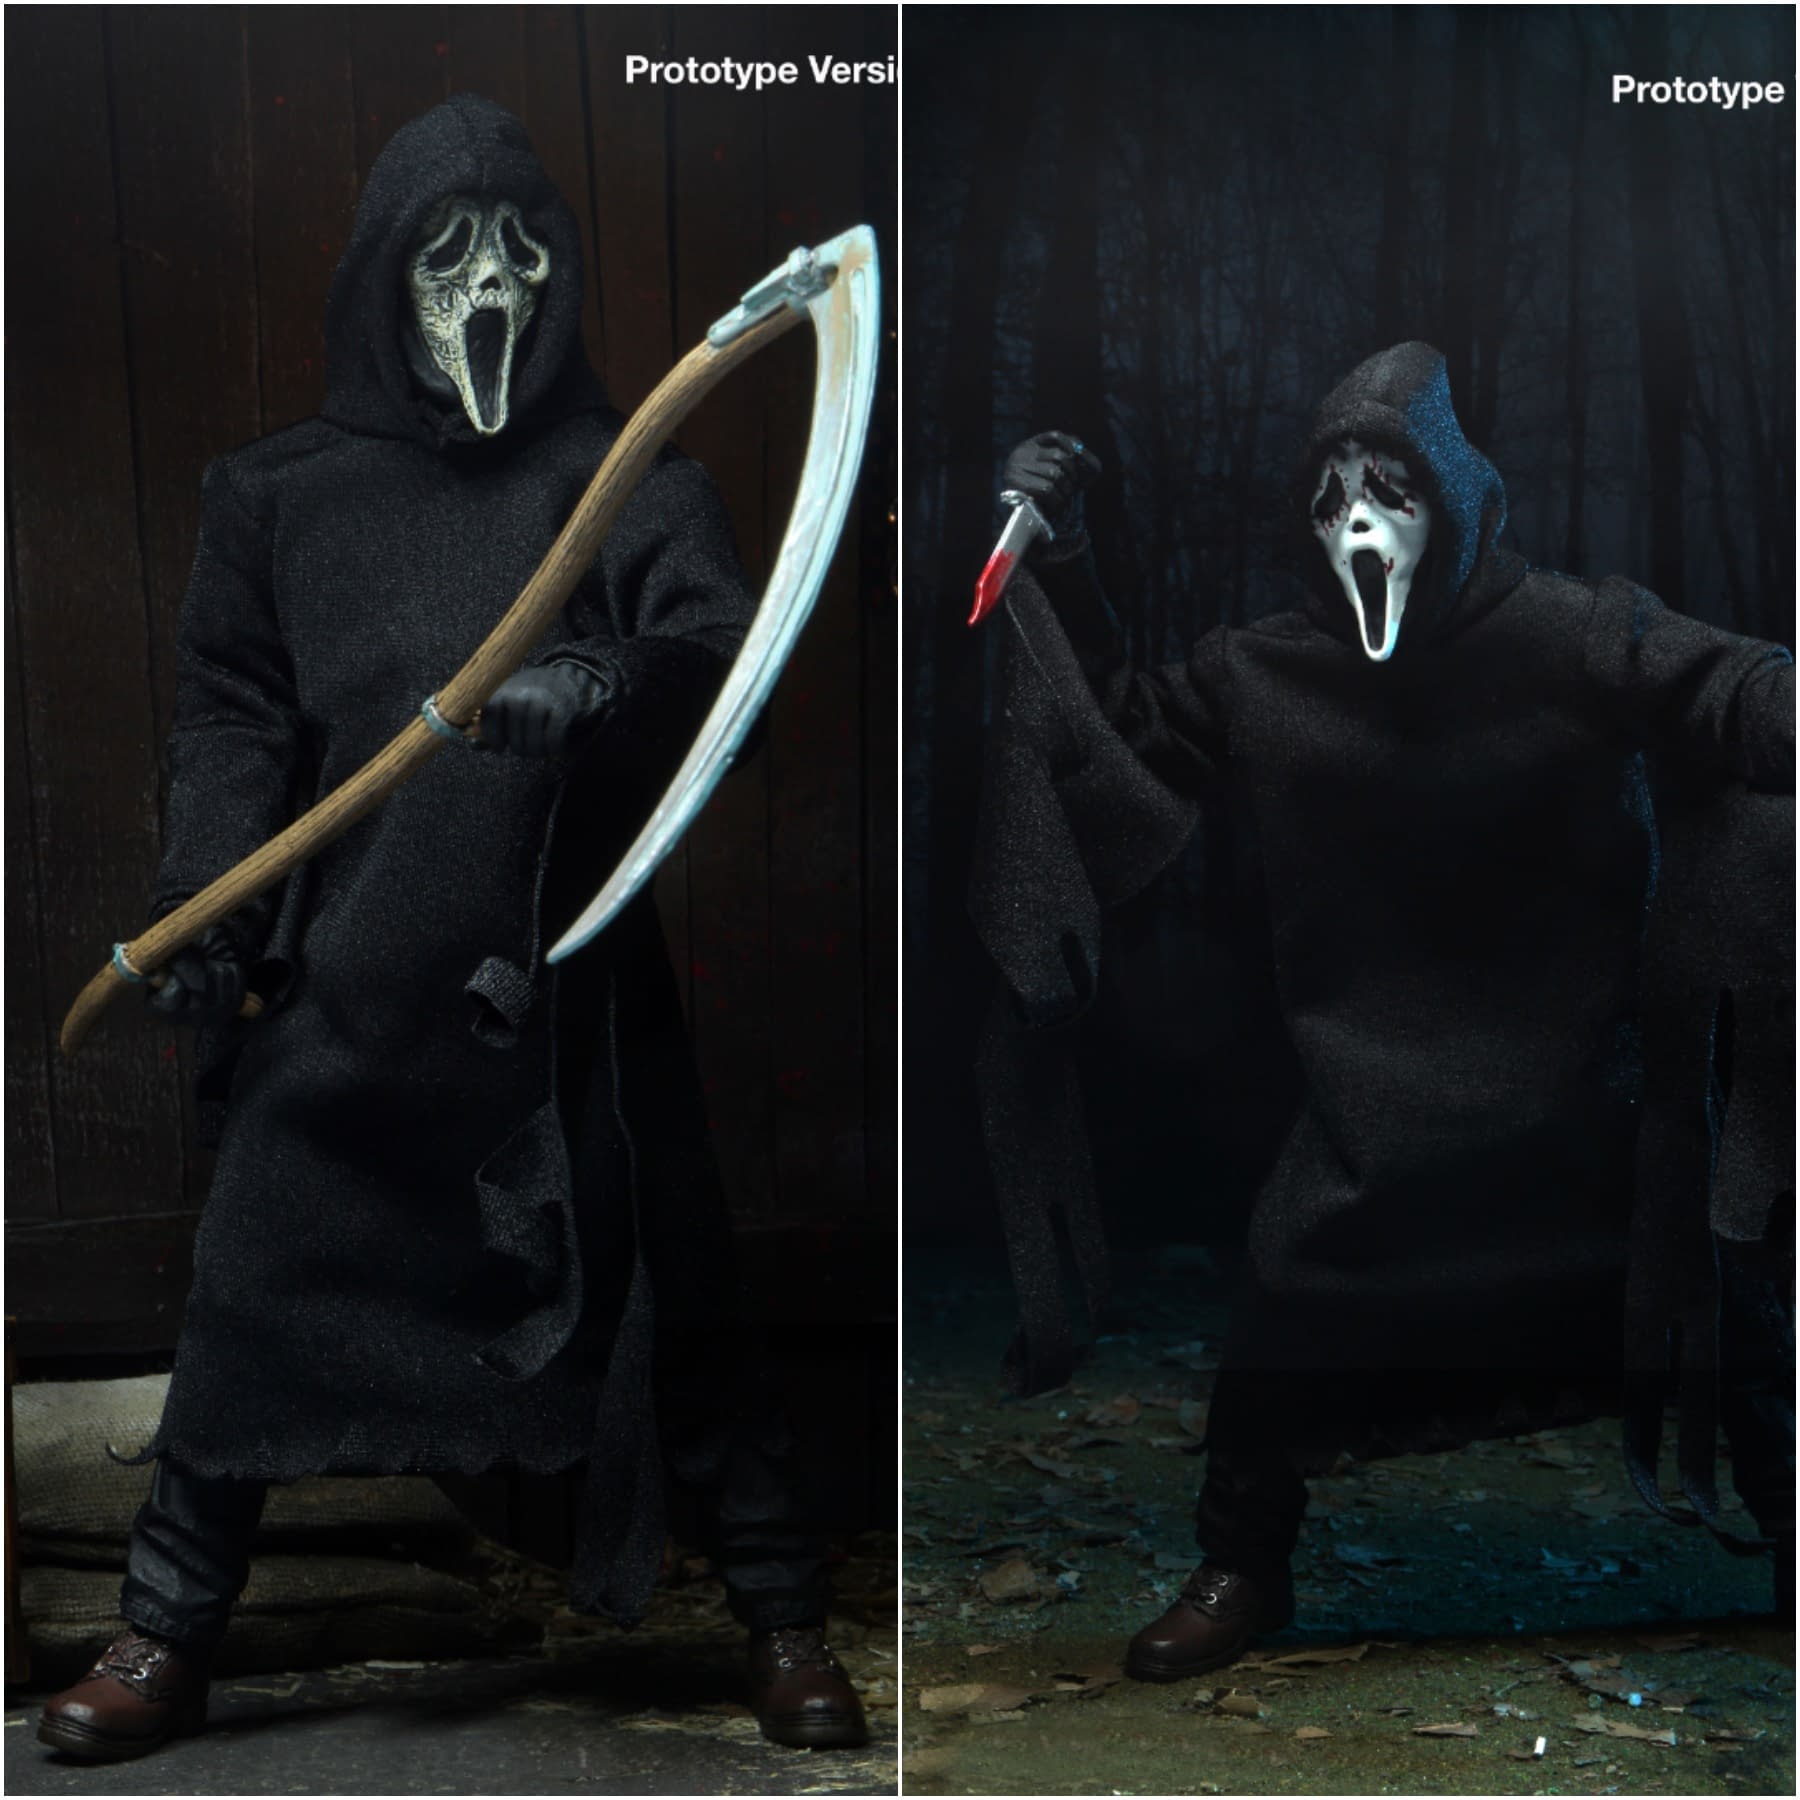 NECA Debuts Two New Ghostface FIgures From Scream Franchise